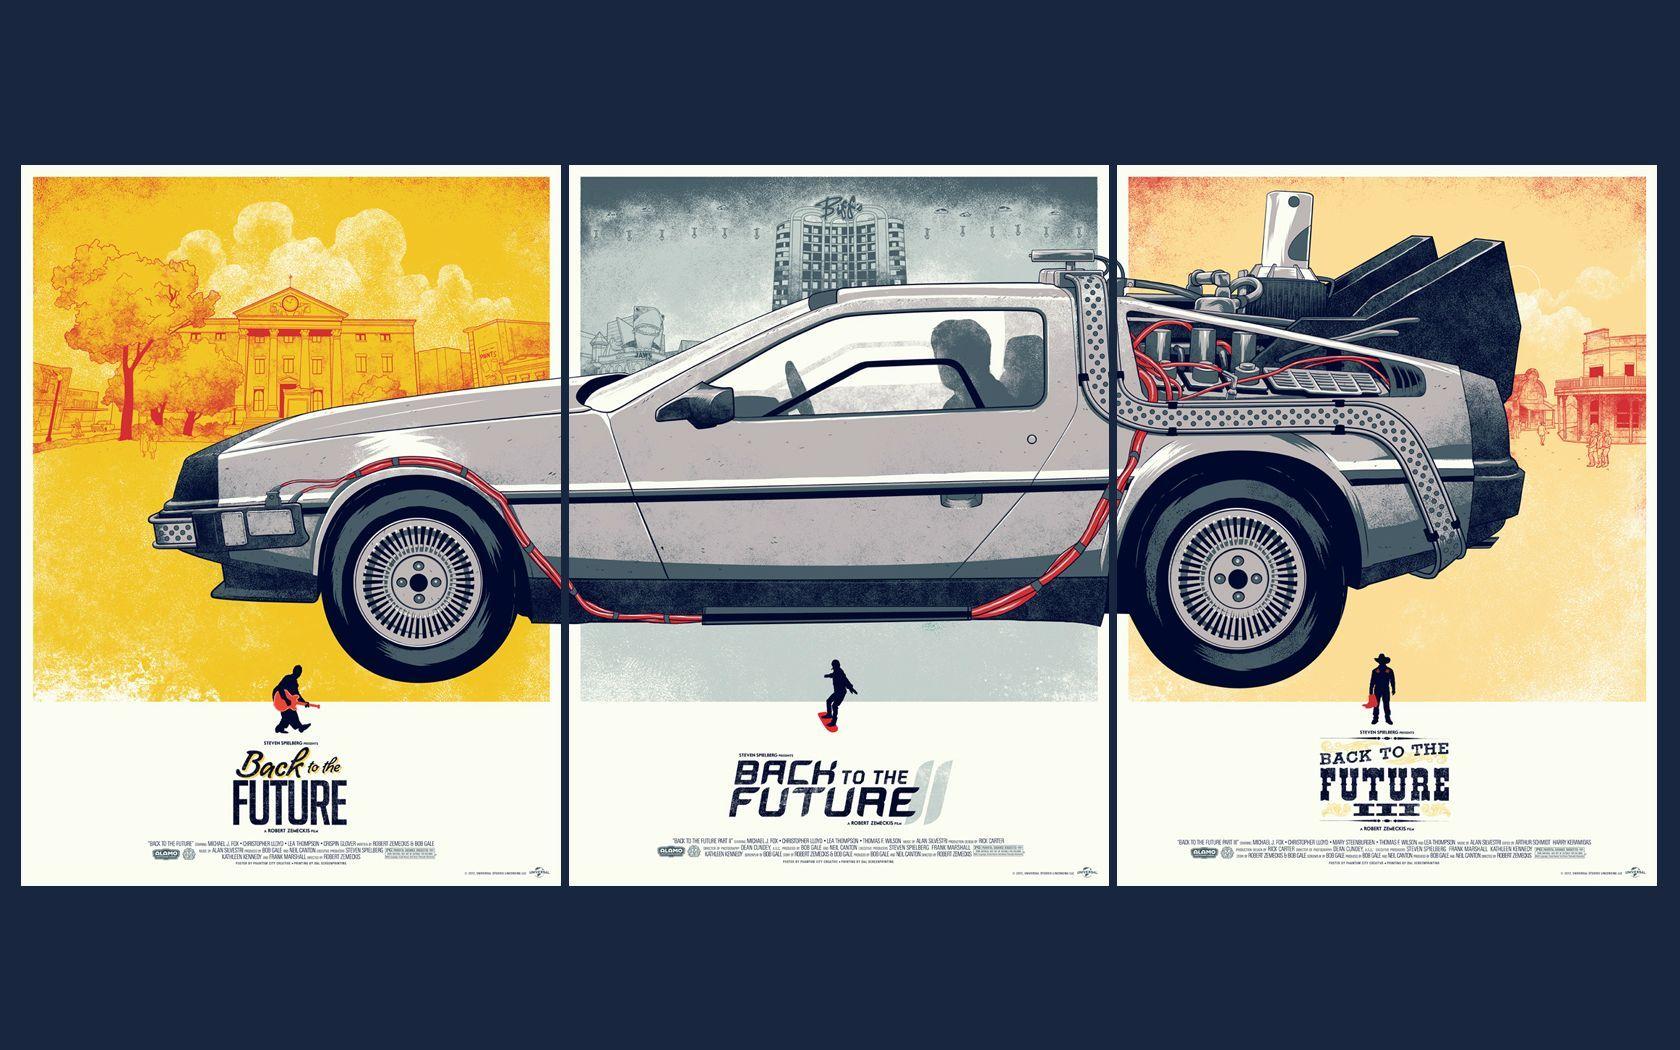 Made a wallpaper from the Back to the Future posters (1680x1050)